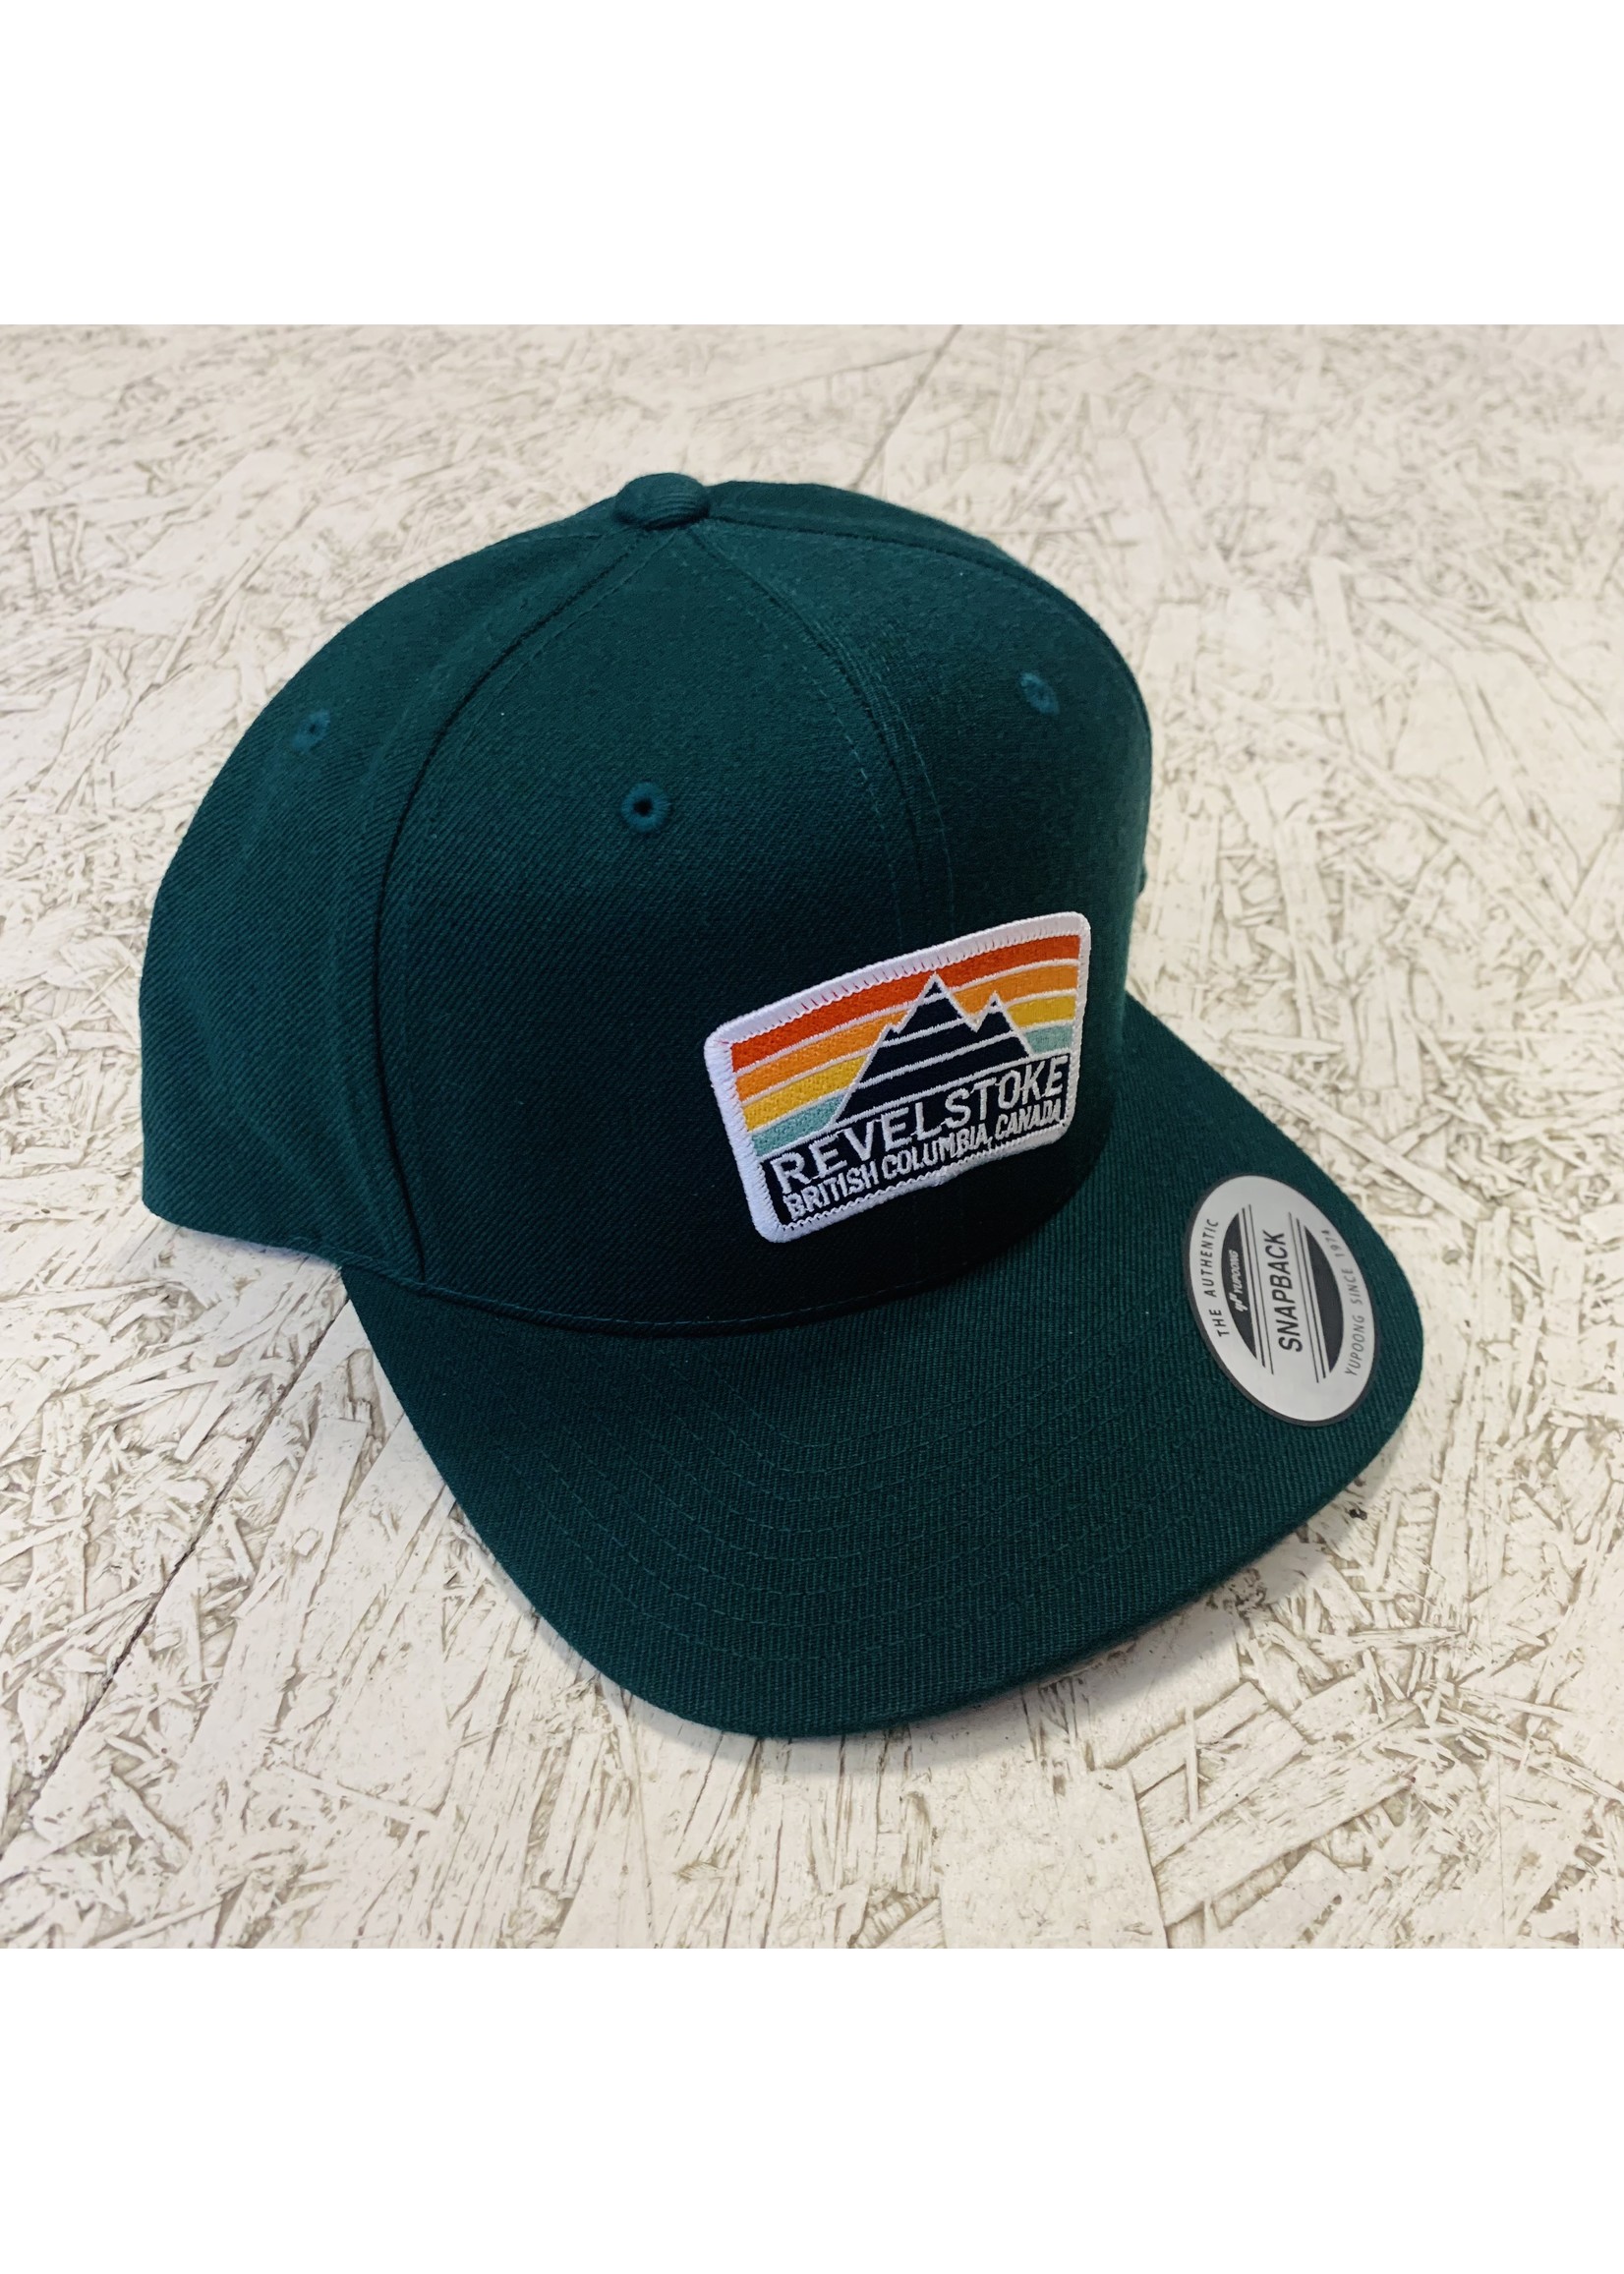 Stoke Life Stoke - Rainbow Patch Hat - Forrest